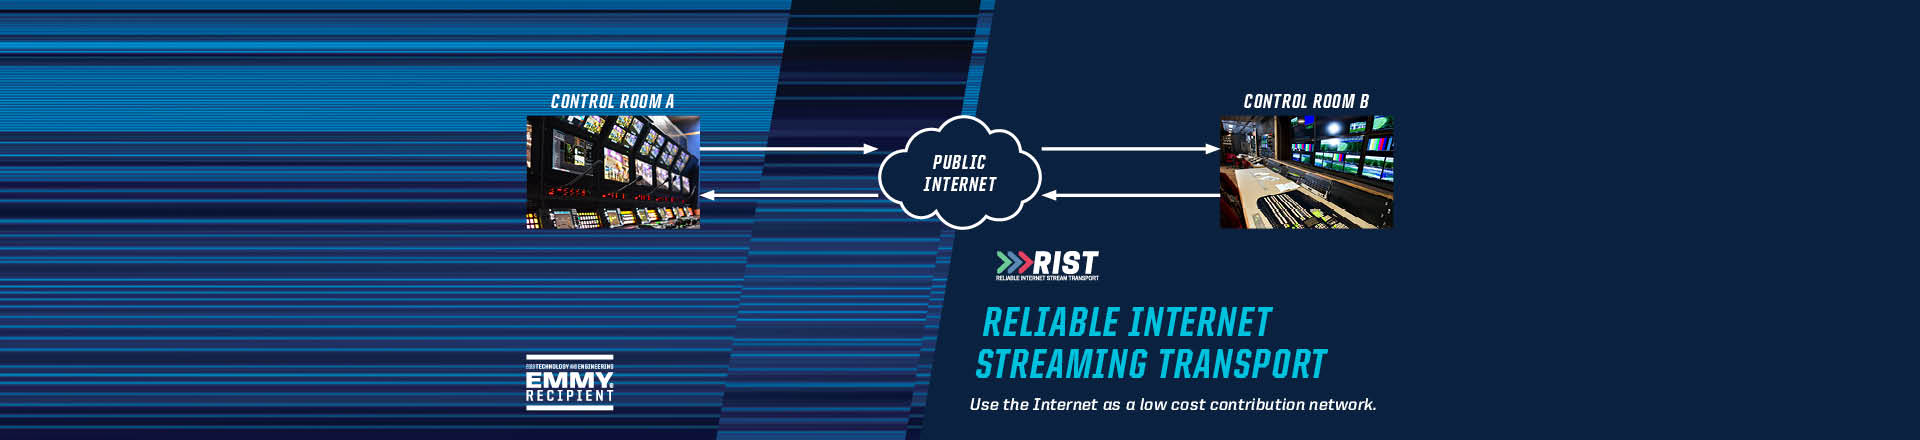 Reliable Internet Streaming Transport (RIST)